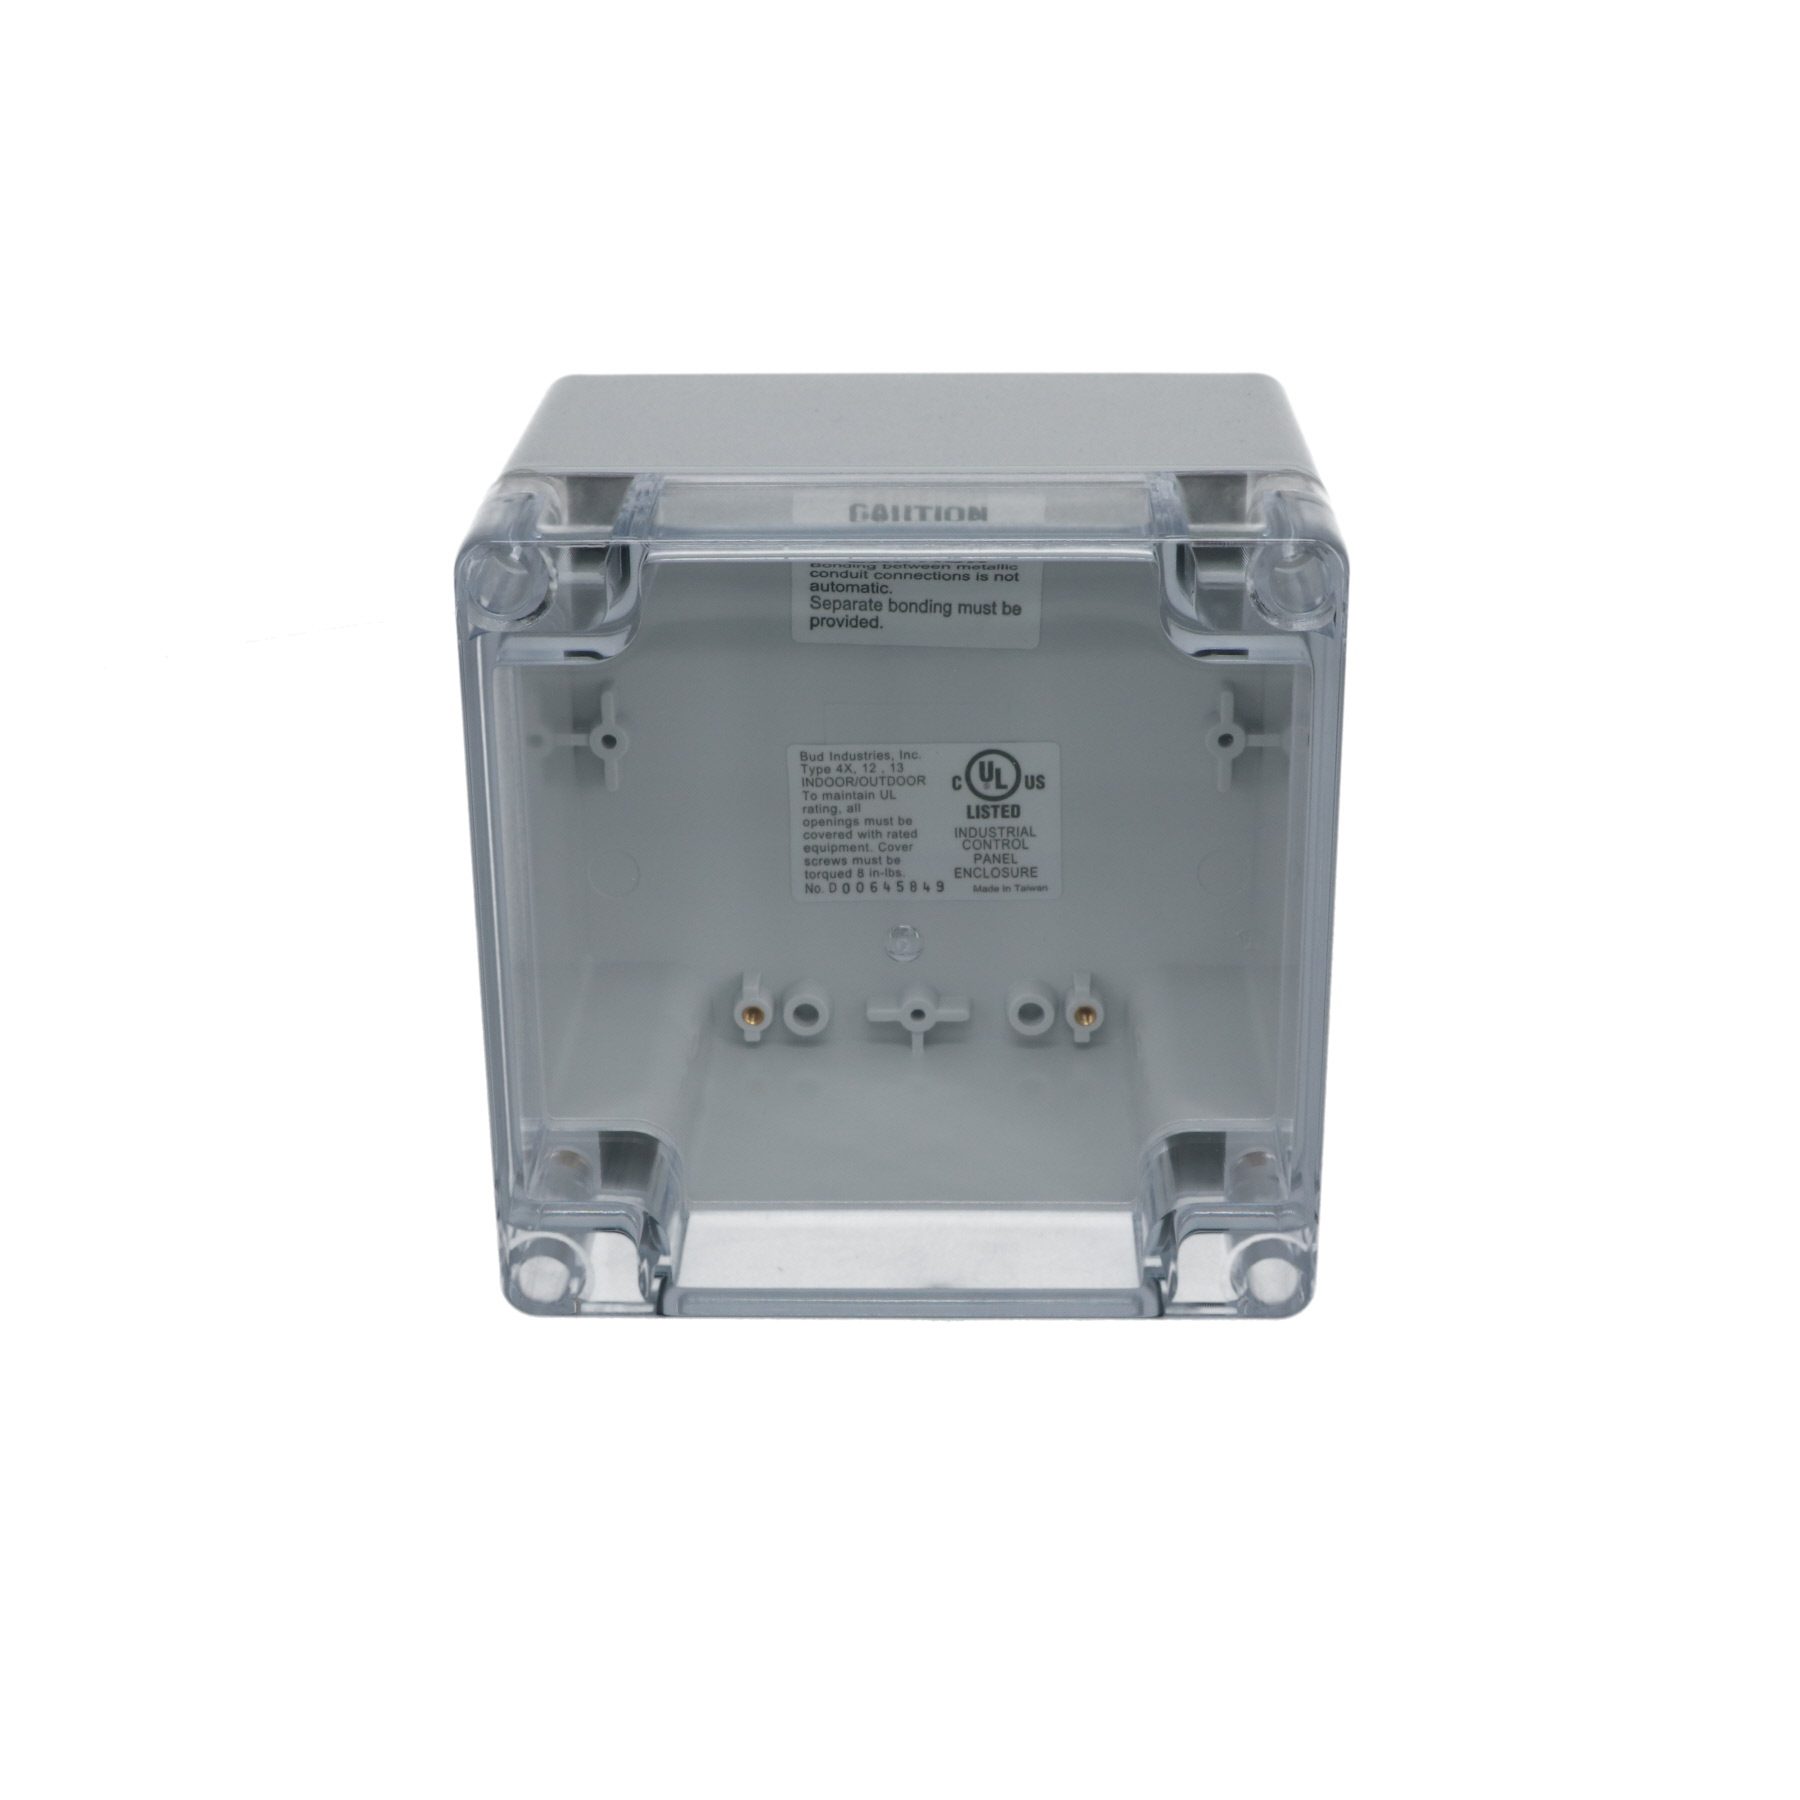 IP65 NEMA 4X Box with Clear Cover PN-1337-C